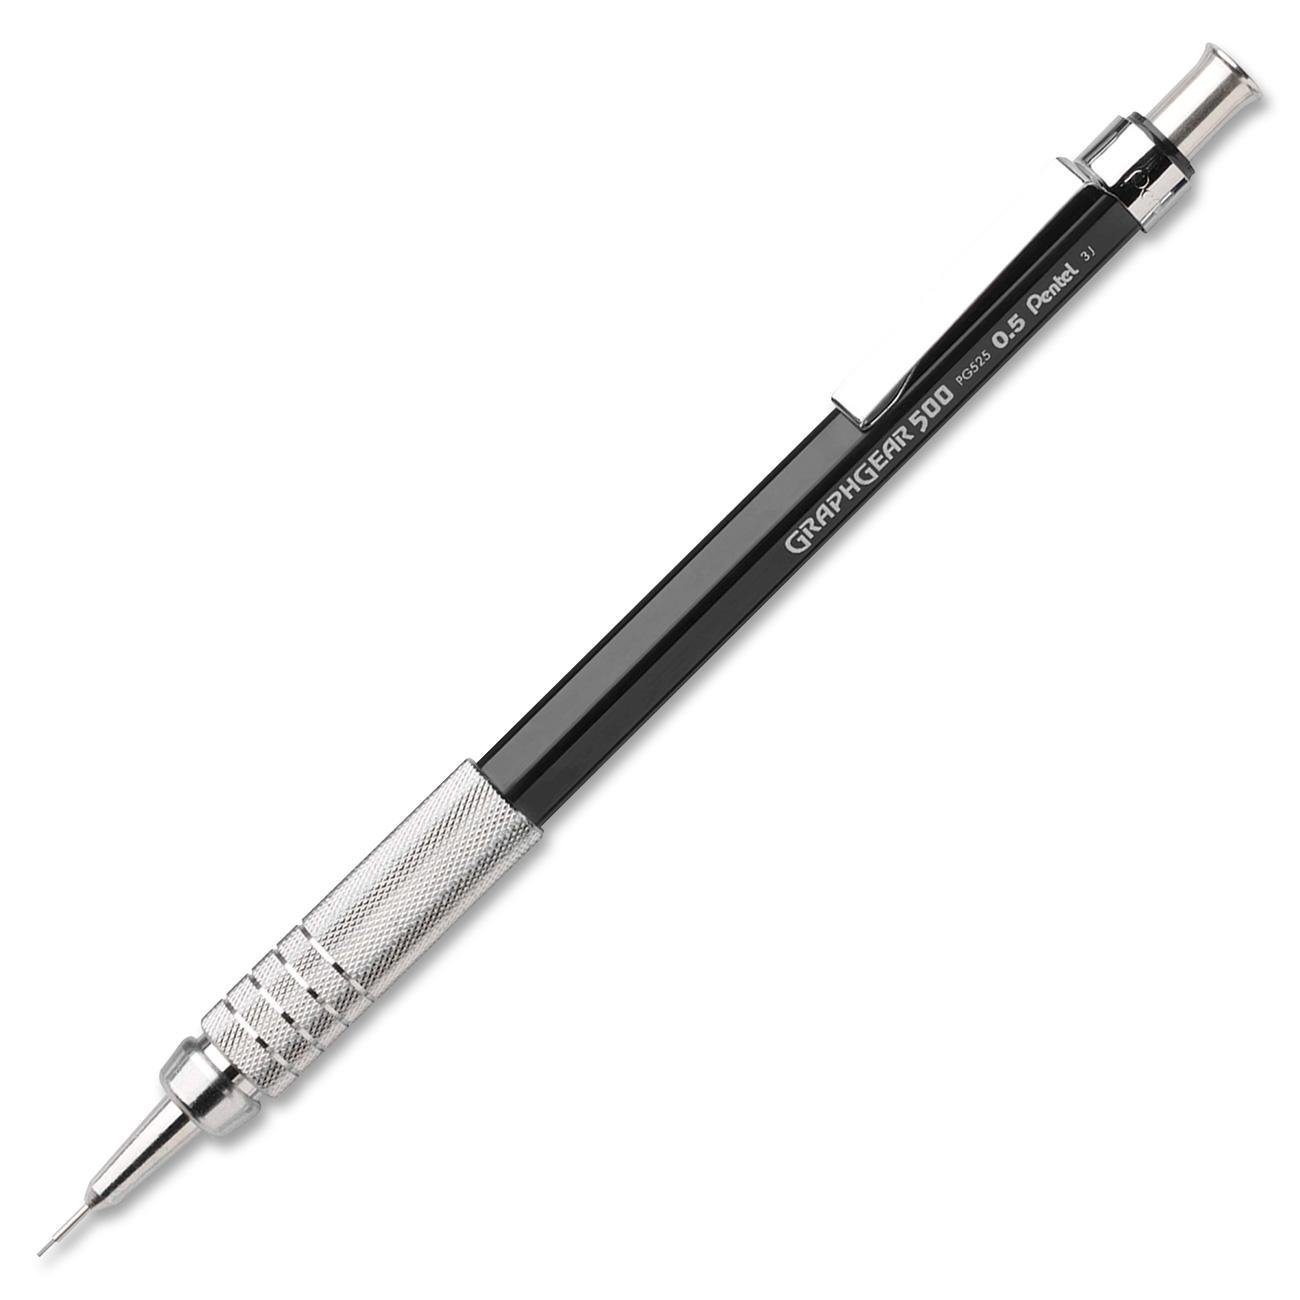 The Best Mechanical Pencils for Drawing & Sketching in 2023